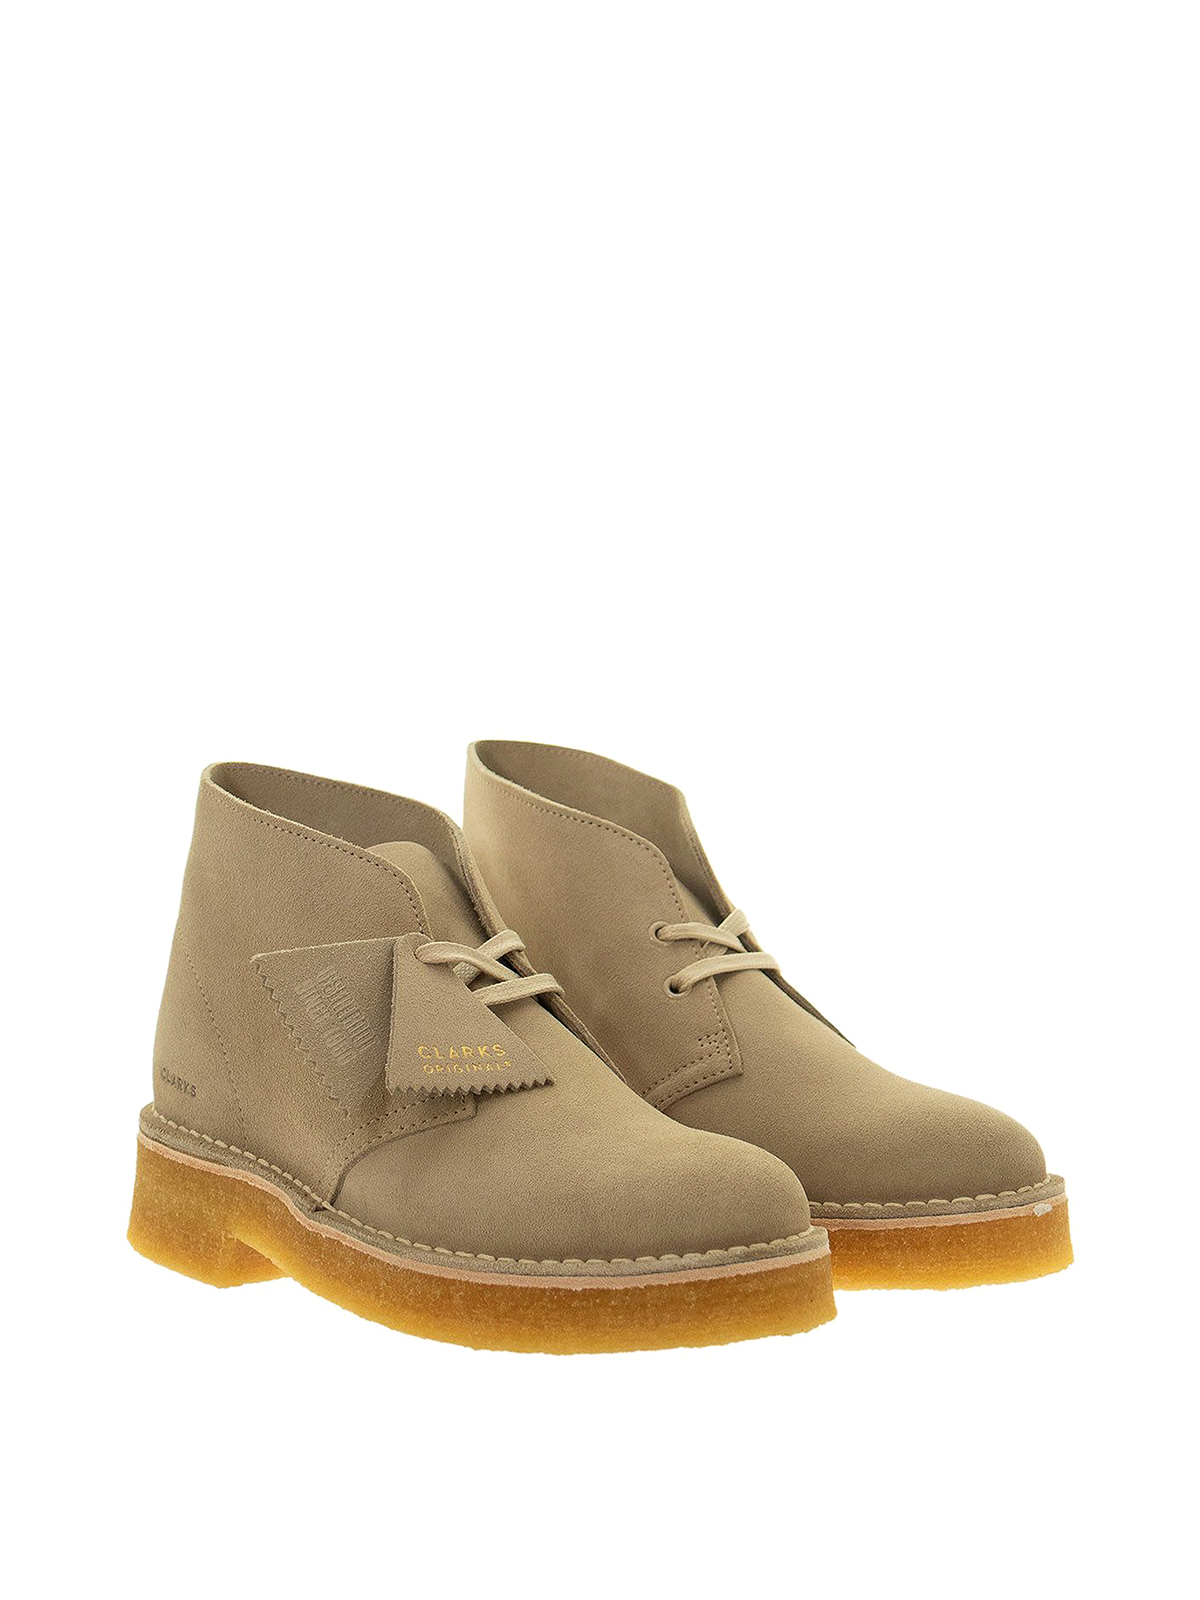 Ankle boots Clarks - 221 suede desert boots - 155857